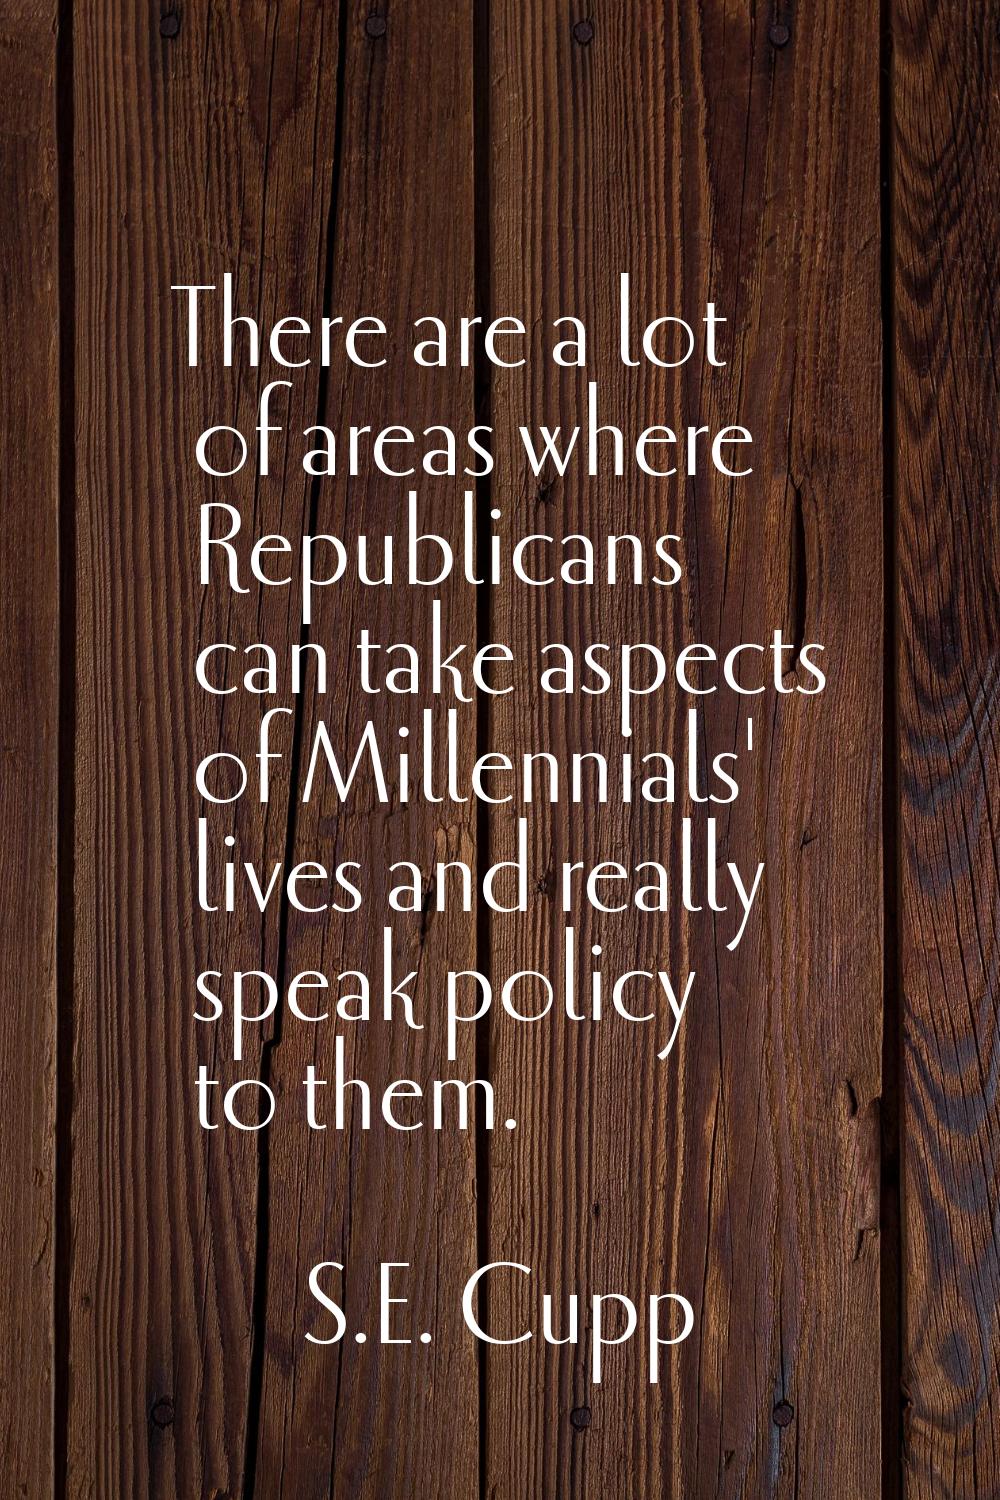 There are a lot of areas where Republicans can take aspects of Millennials' lives and really speak 